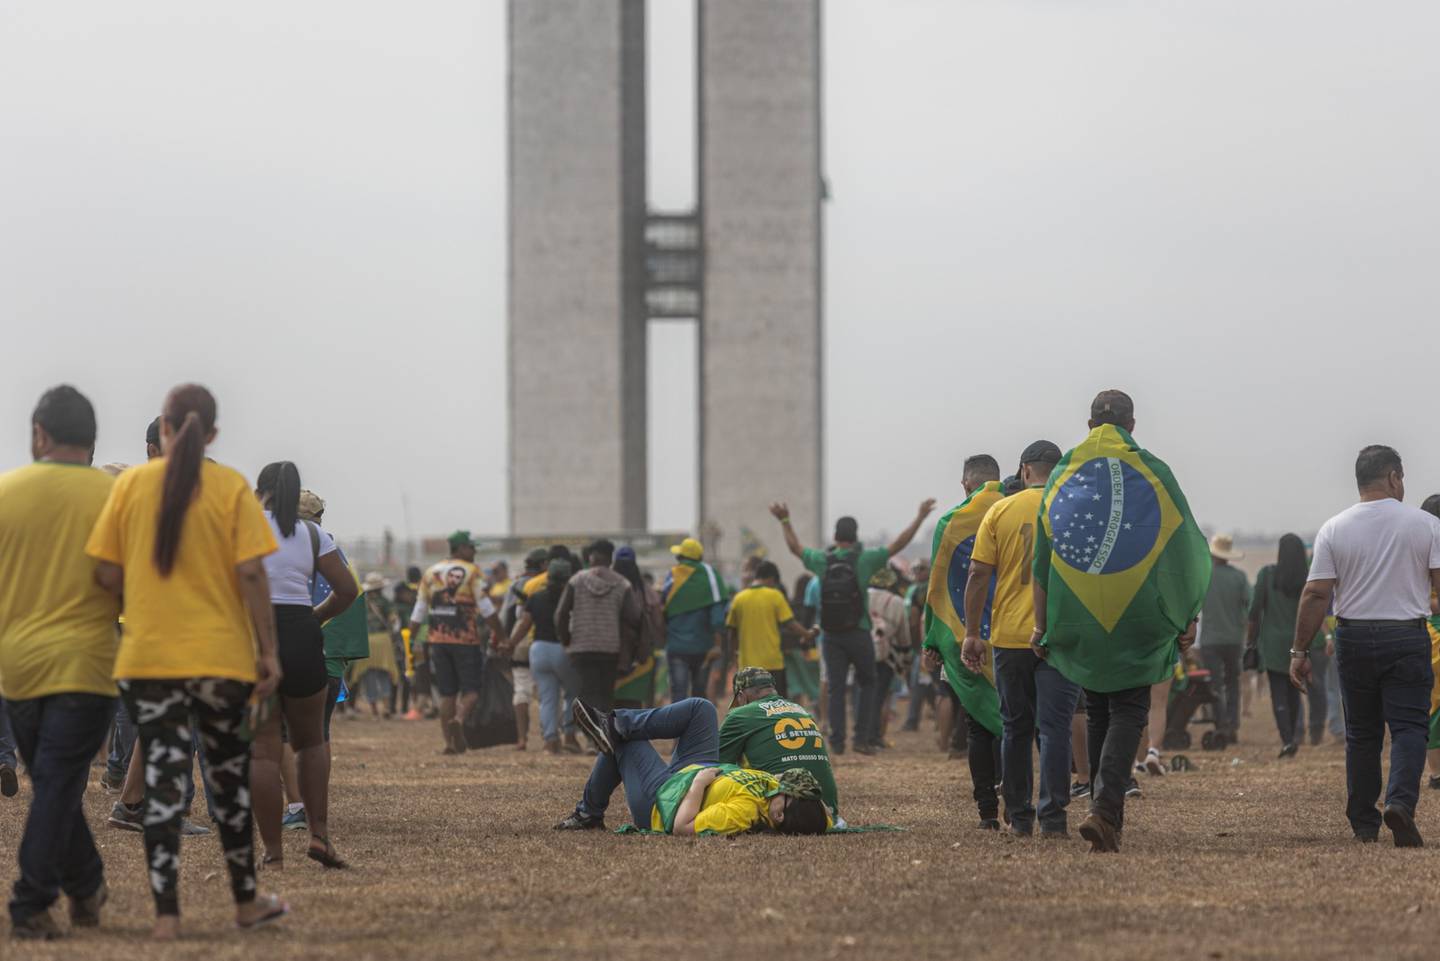 After the first round of voting in the Brazilian presidential elections, the outcome had some investors boosting their exposure to domestic assets.